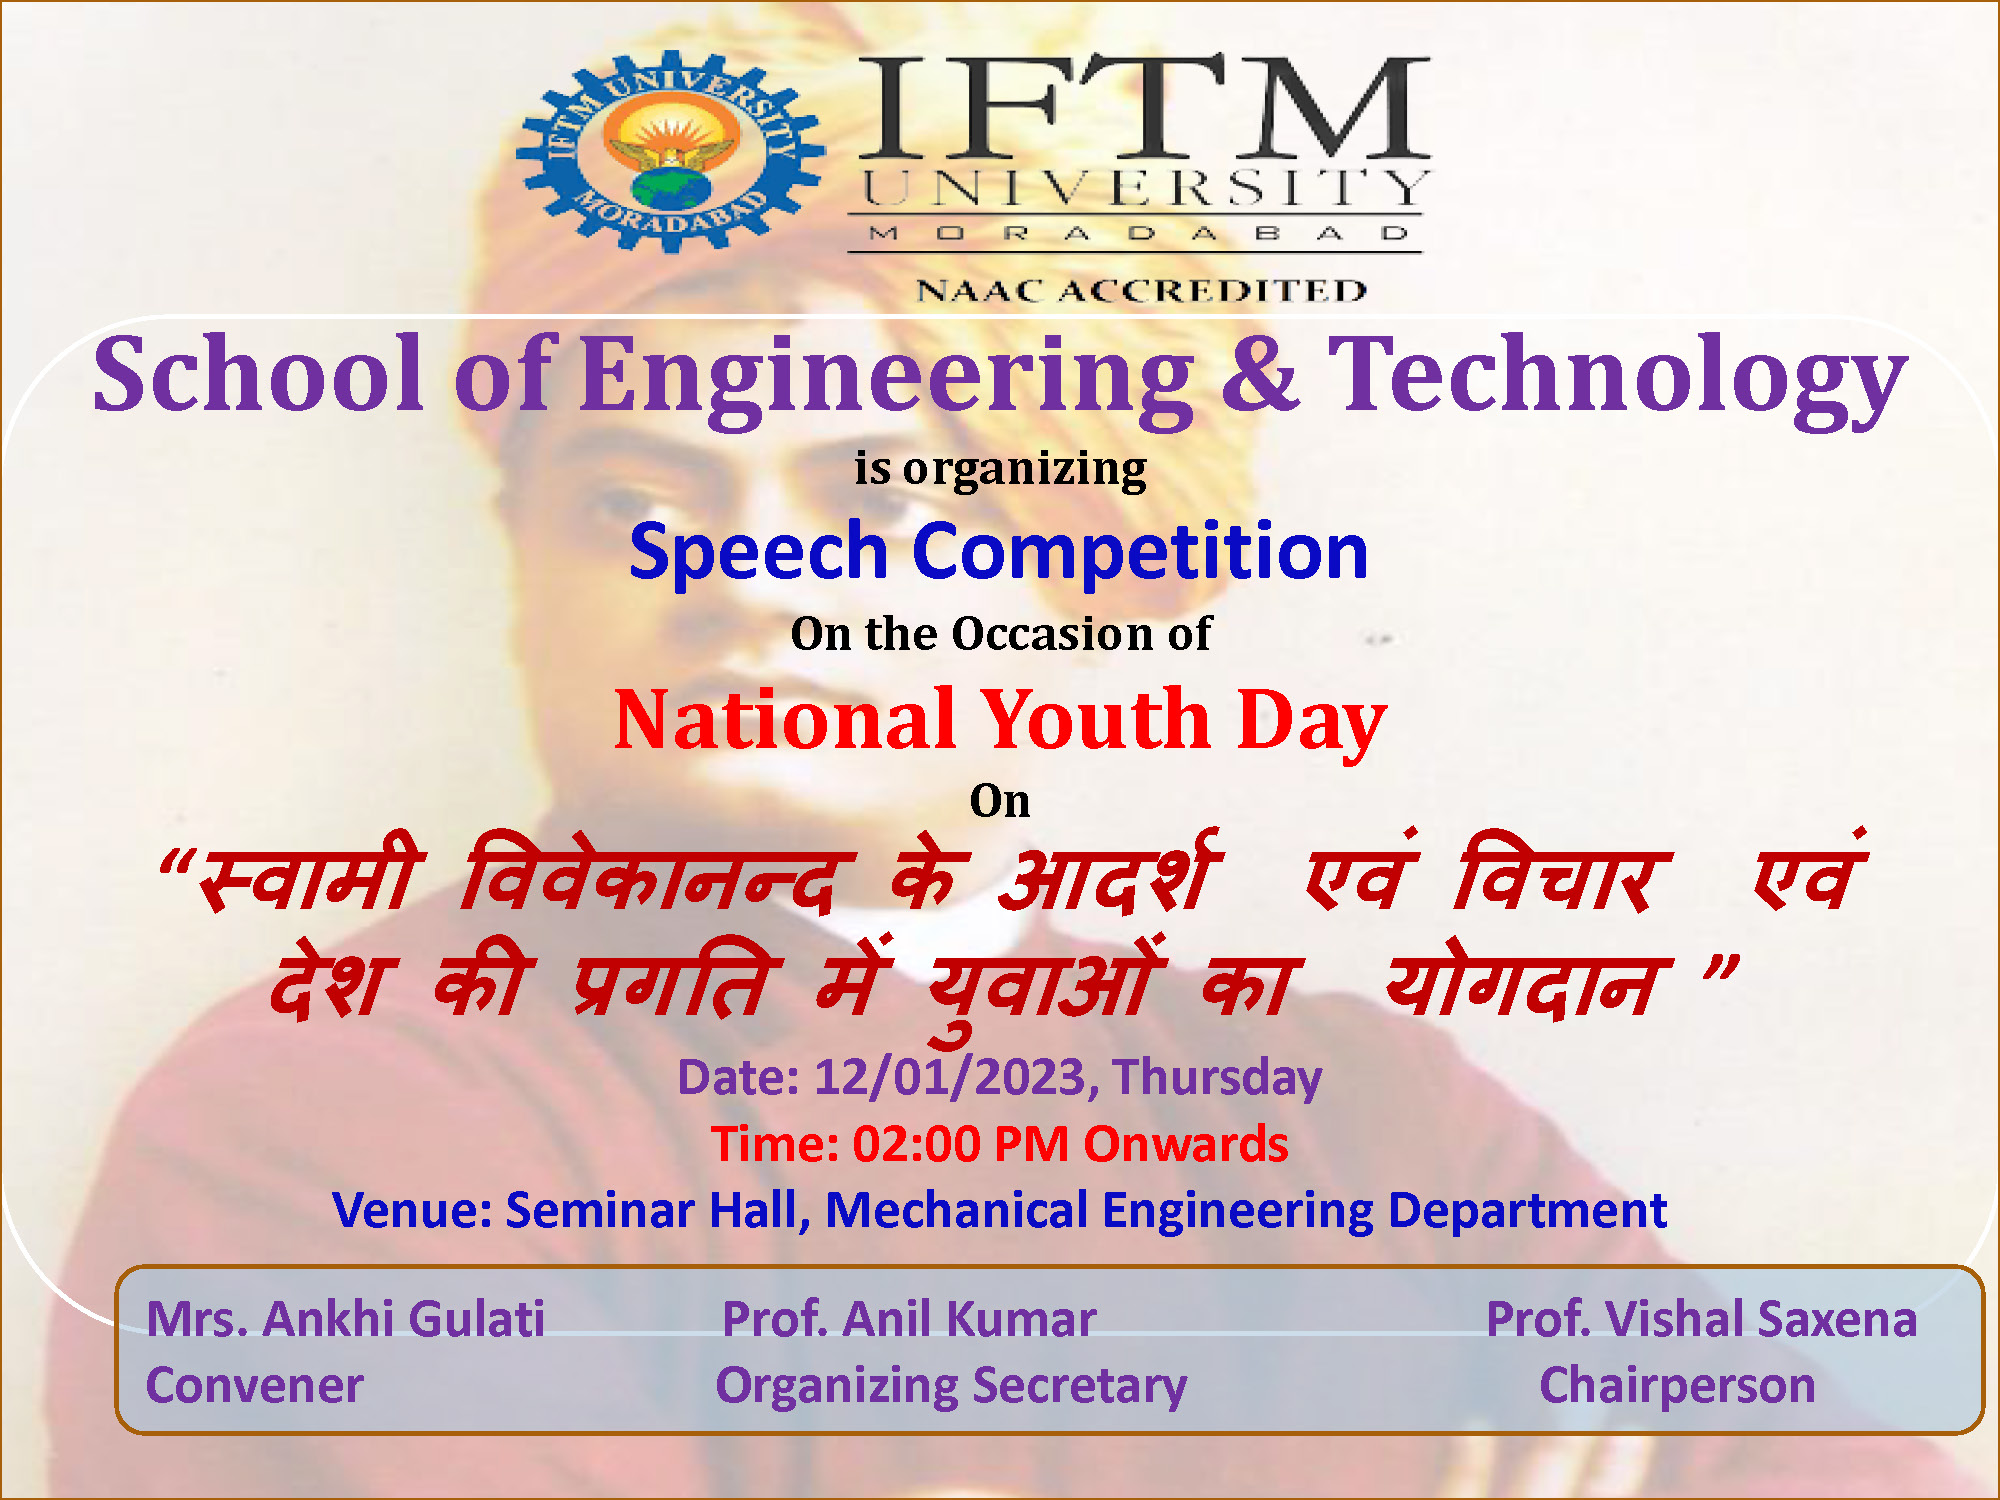 Speech Competition On the Occasion of National Youth Day